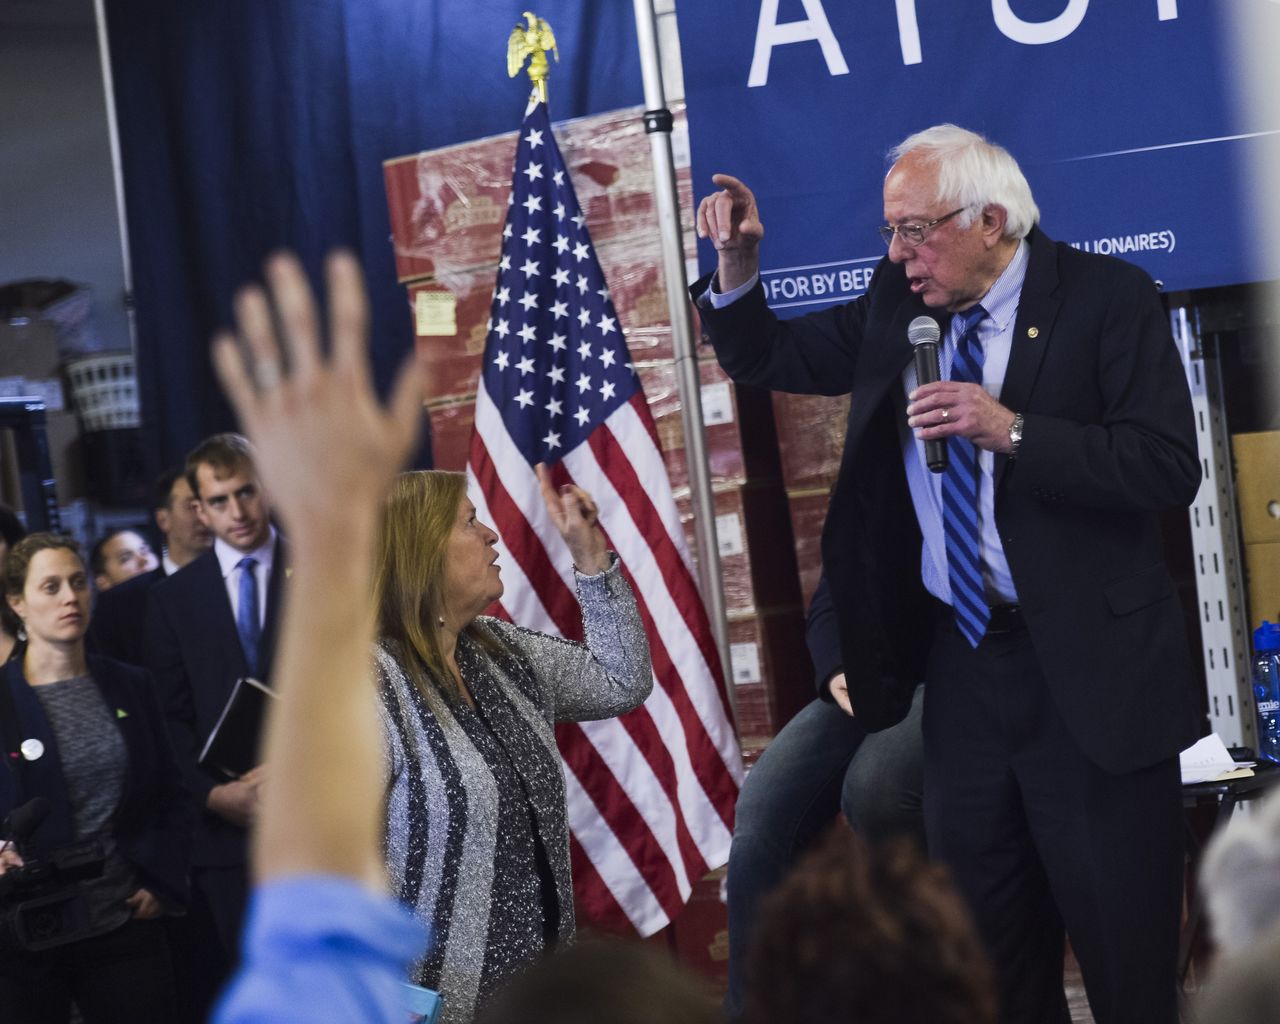 Jane Sanders, wife of Democratic presidential candidate Bernie Sanders, interrupts her husband to let him know he has gone over time and is late for his next speaking engagement in South Charleston, West Virgina, during a campaign event in Kimball, West Virginia, on Thursday.